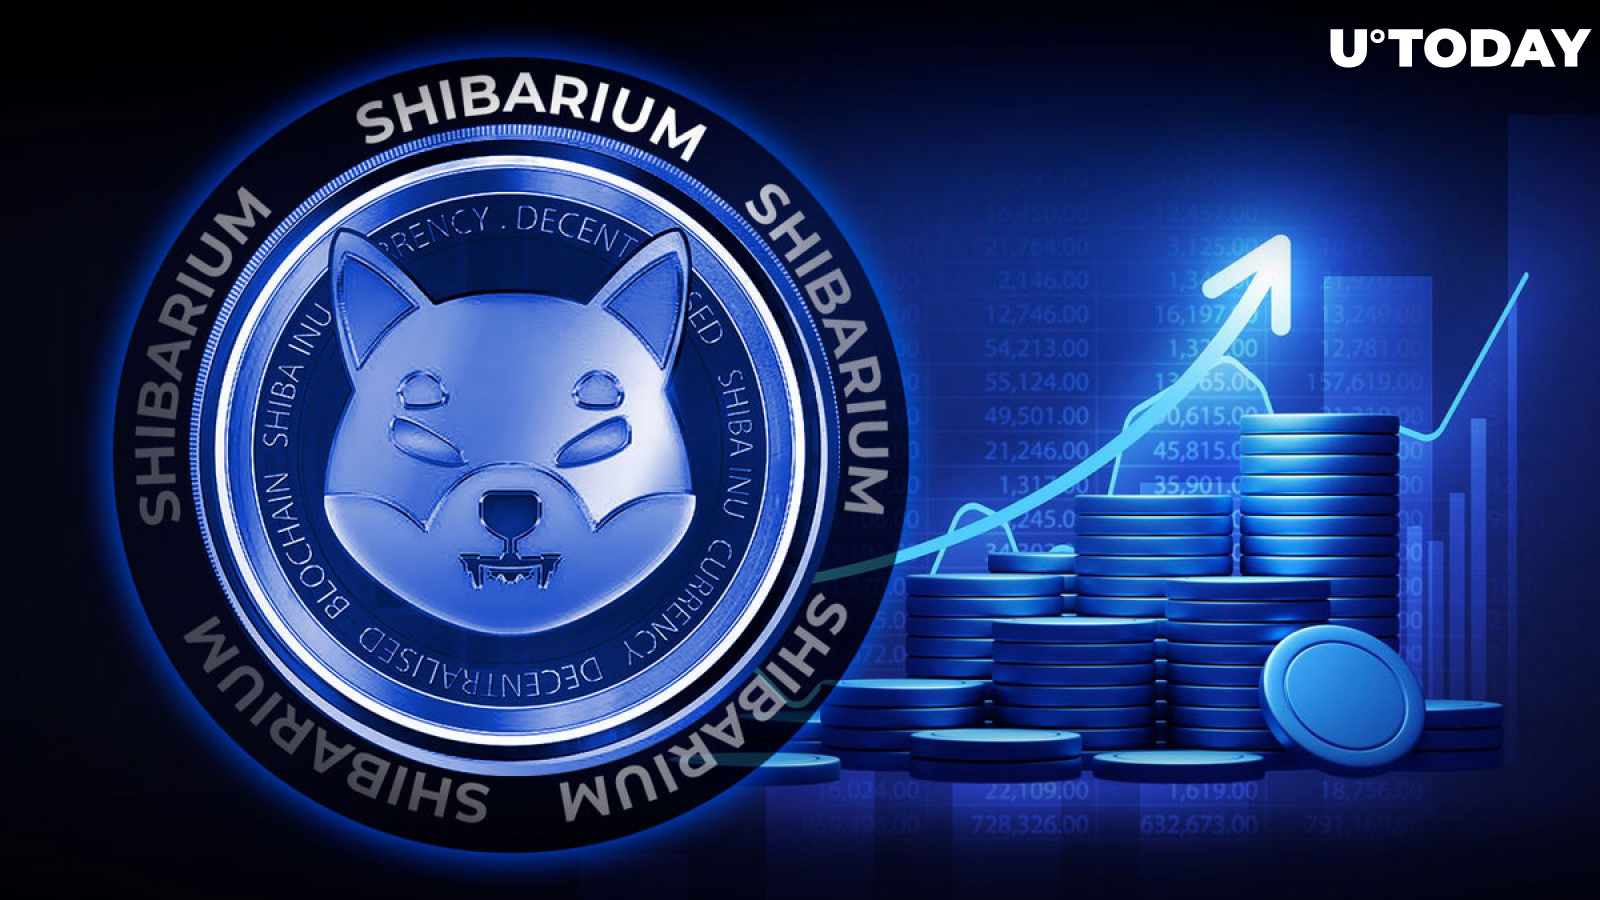 Shibarium's Transactions Soar as Major Exchange Hints at Support